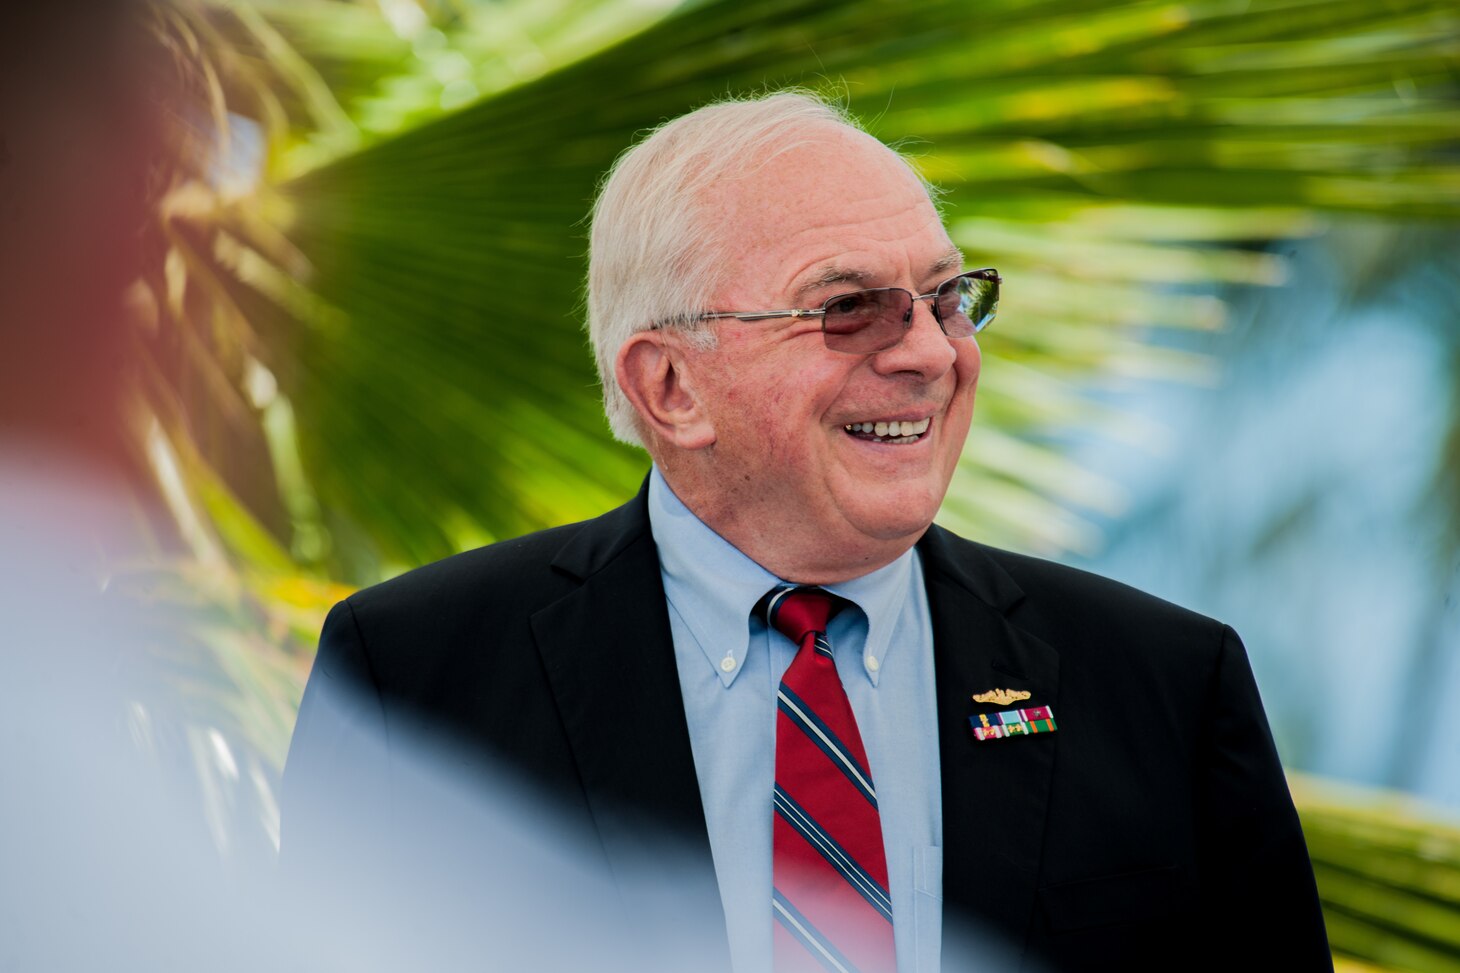 Retired Vice Adm. Albert Konetzni laughs at jokes from his former colleagues describing his historic moments as Pacific Fleet Force submarine commander during the Konetzni Hall building dedication ceremony held at Commander, Submarine Squadron 15 headquarters building. As the Pacific Fleet Force submarine commander, Konetzni spearheaded the squadron's reactivation in 2002, forward-deploying three Los Angeles-class fast attack submarines out of Guam.